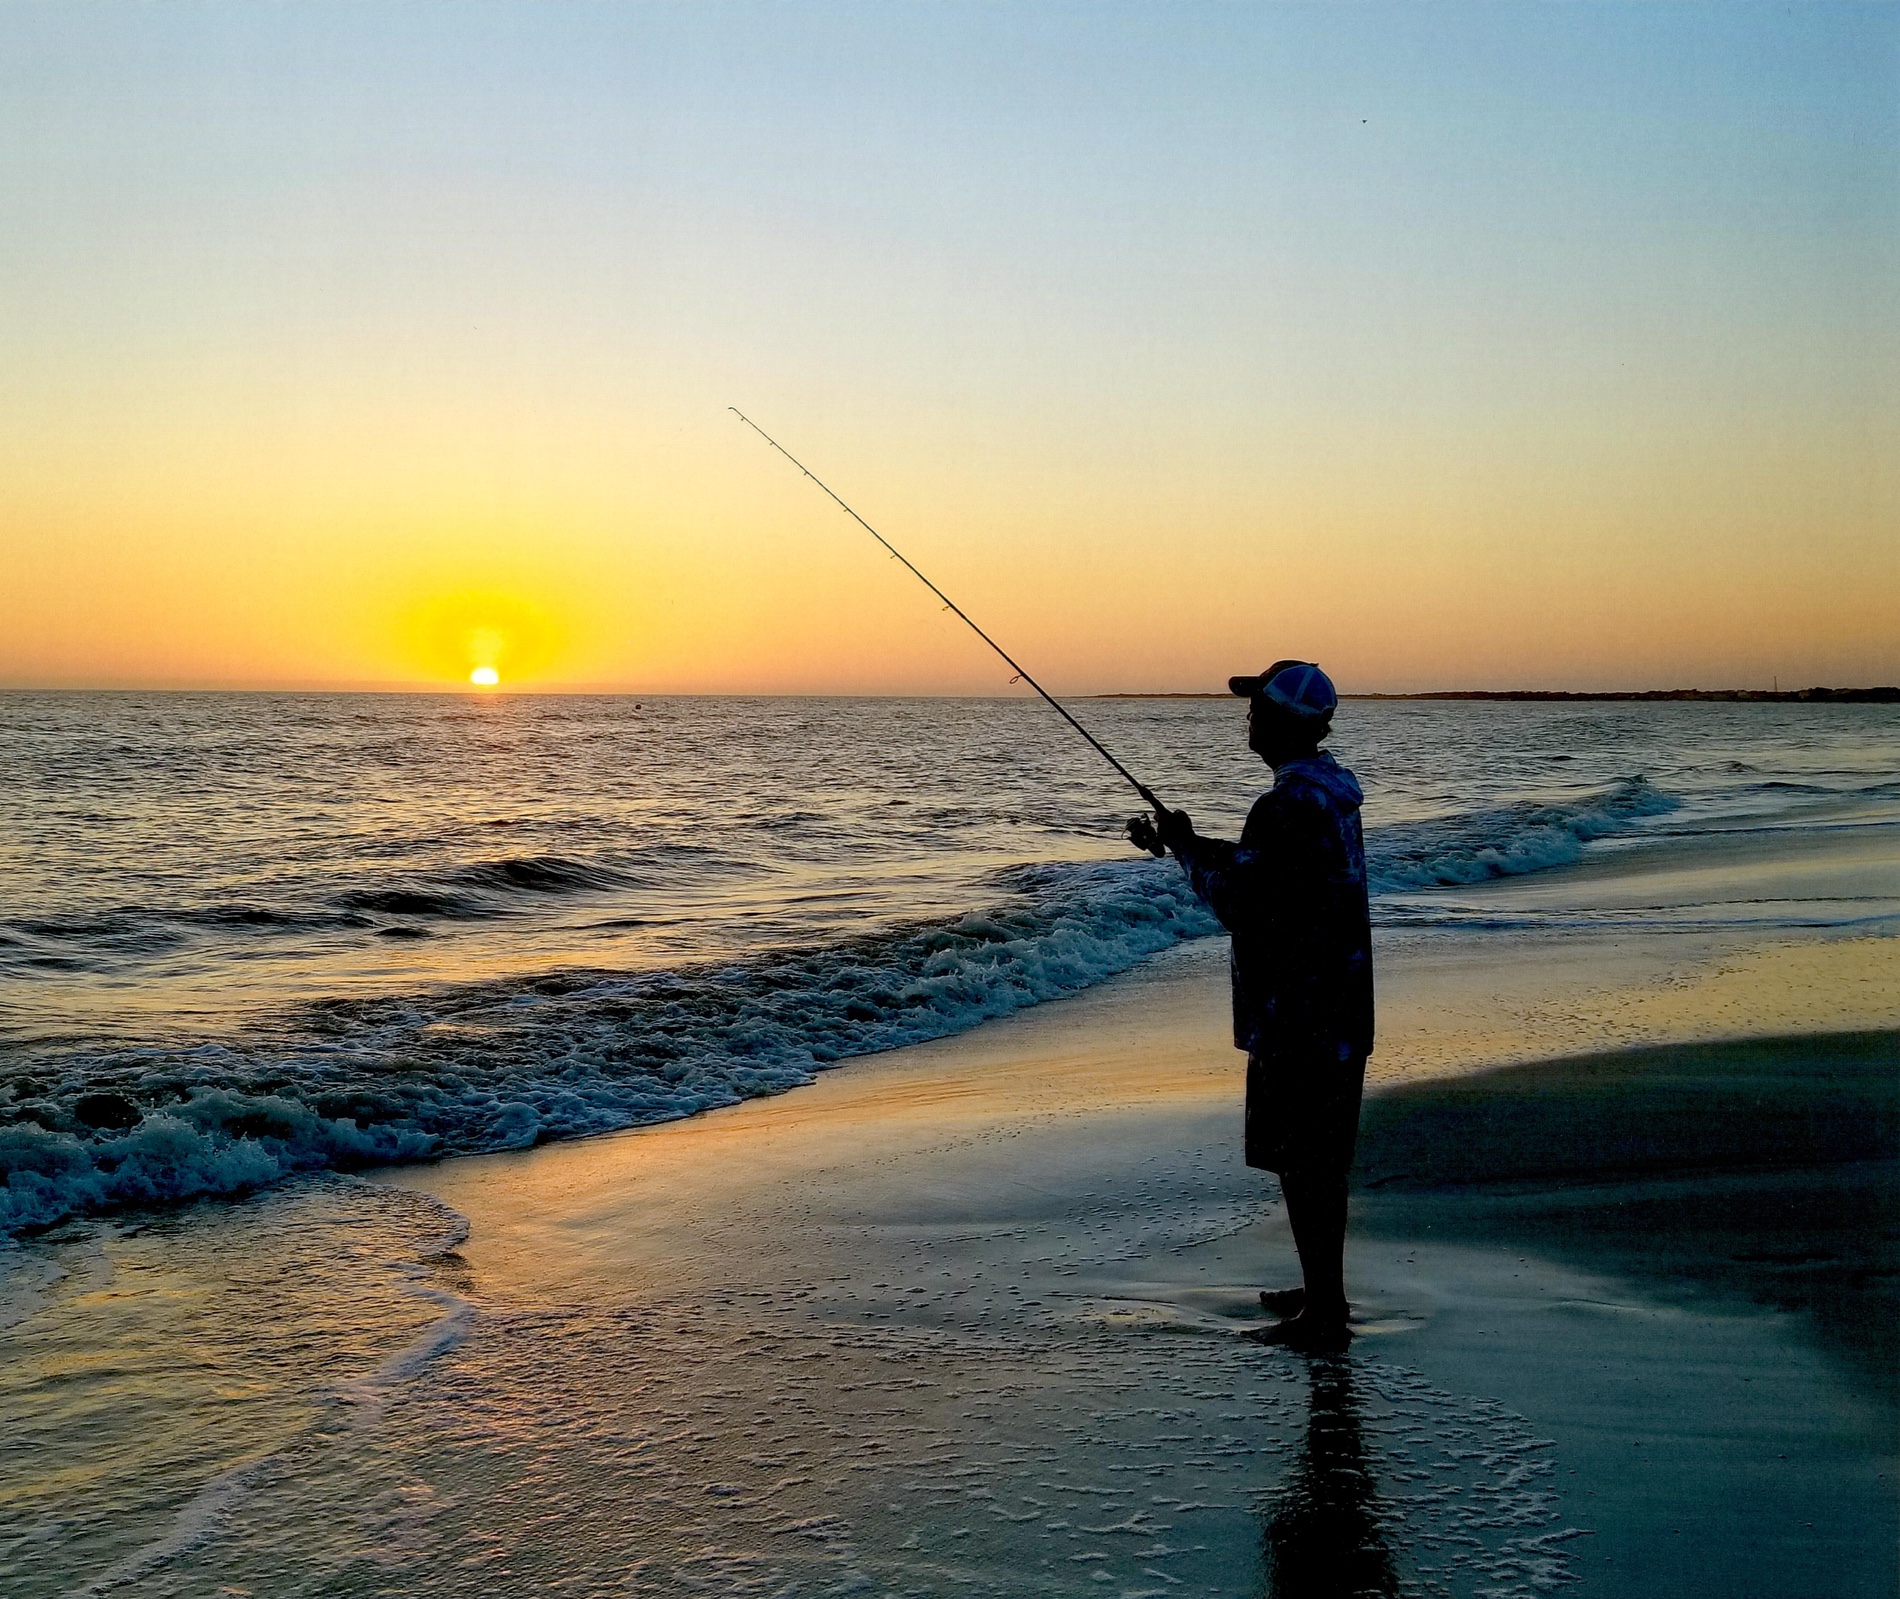 Mexico Beach Photography Contest 2019, Fishing and Boating Third Place